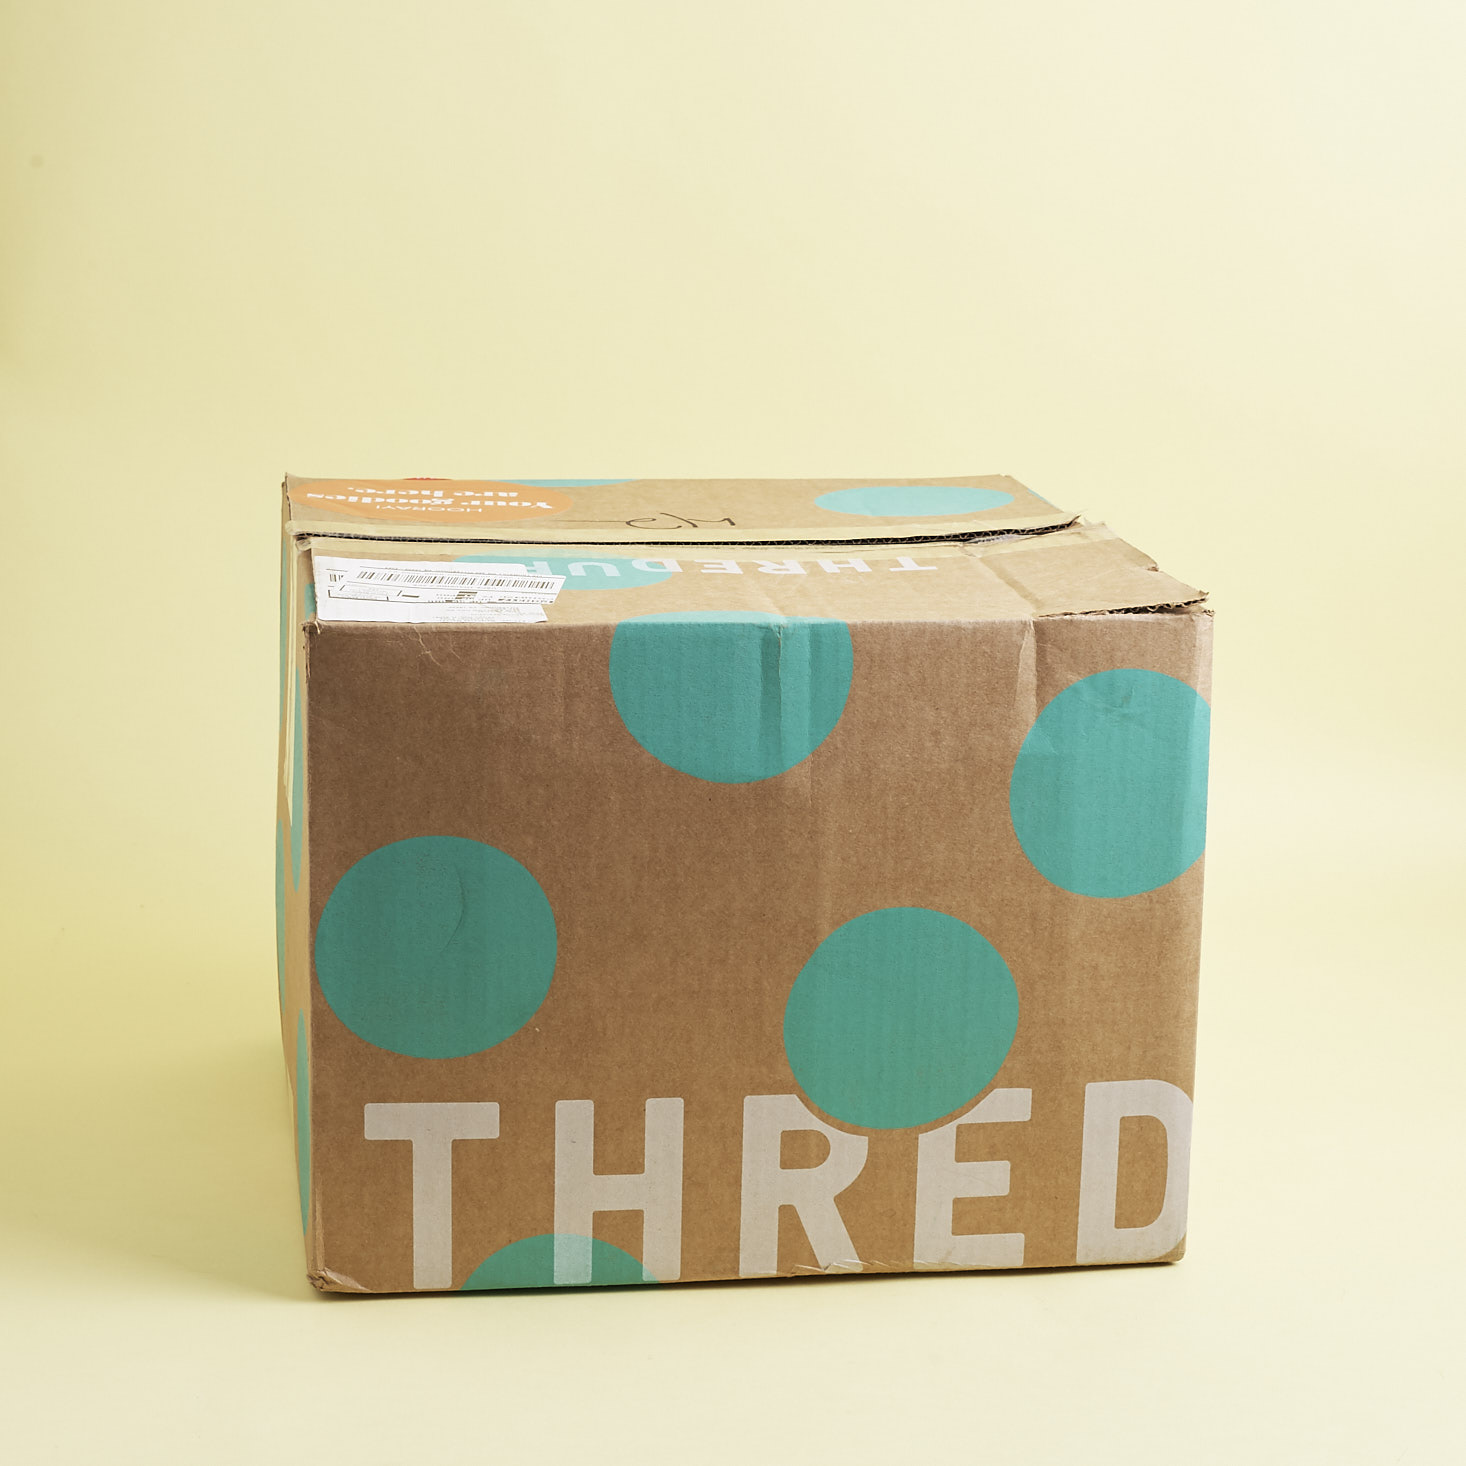 ThredUP “Cold Weather Essentials” Goody Box Review – January 2018